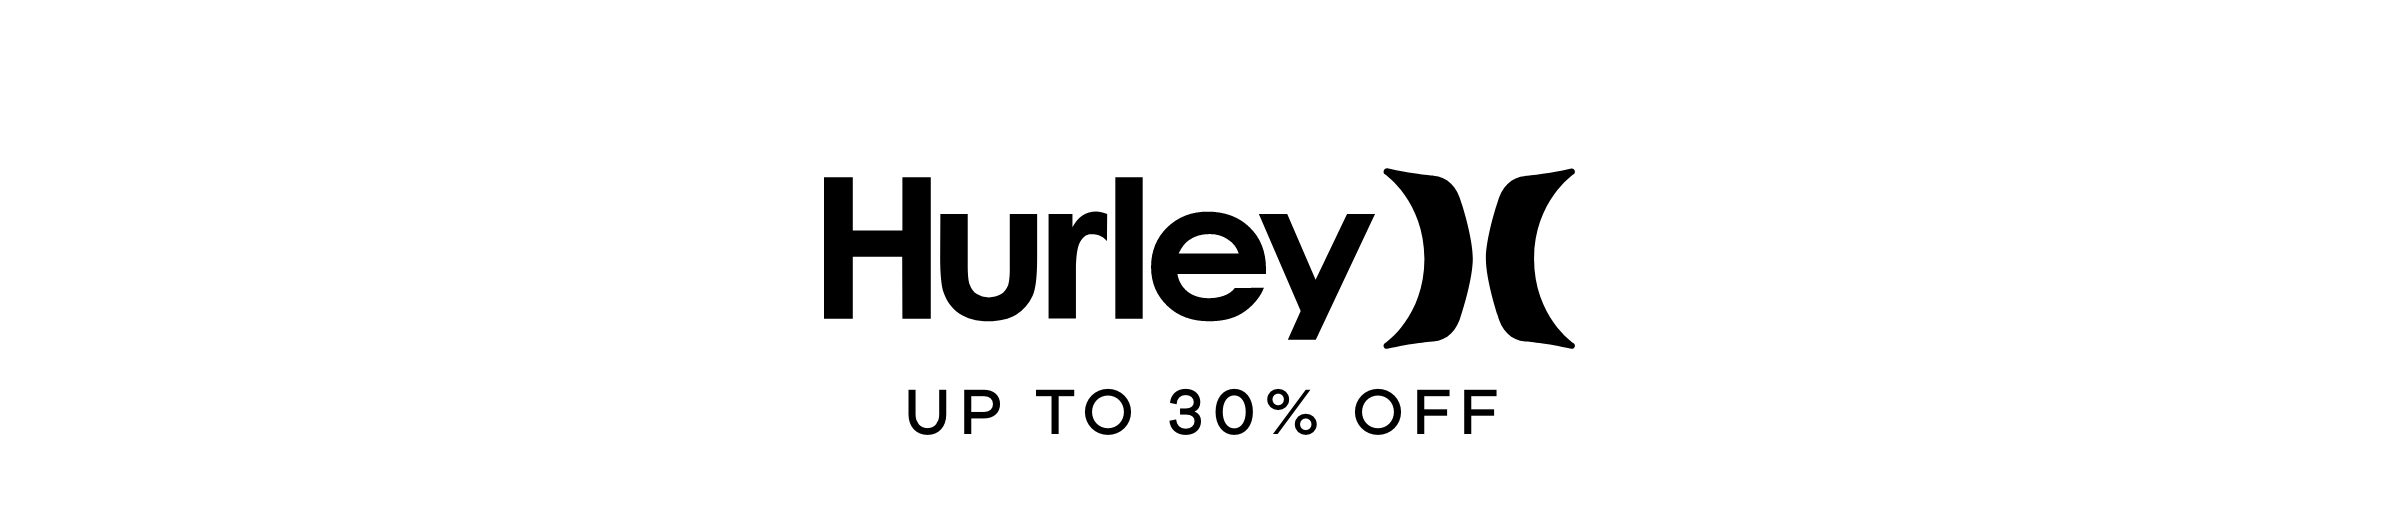 Hurley | Up to 30% off